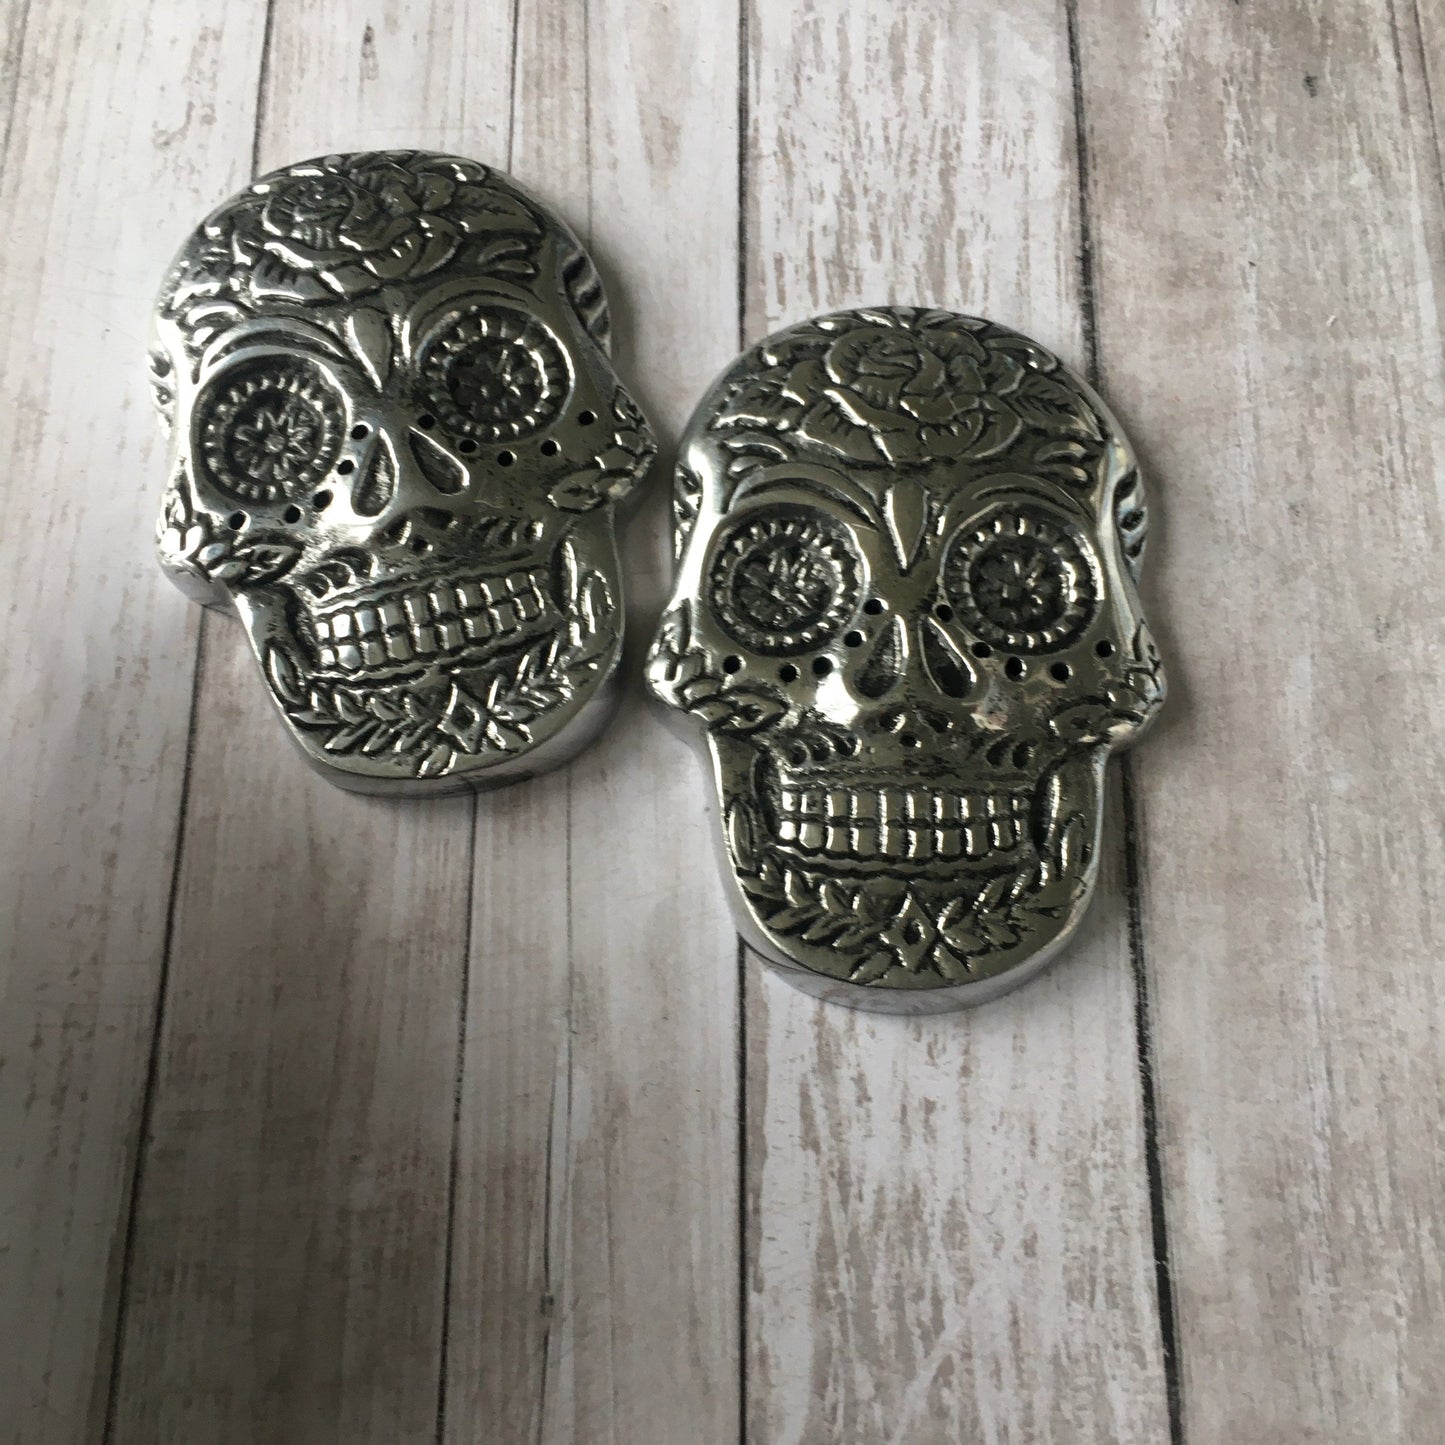 The Day of the Dead Skull Incense Holder